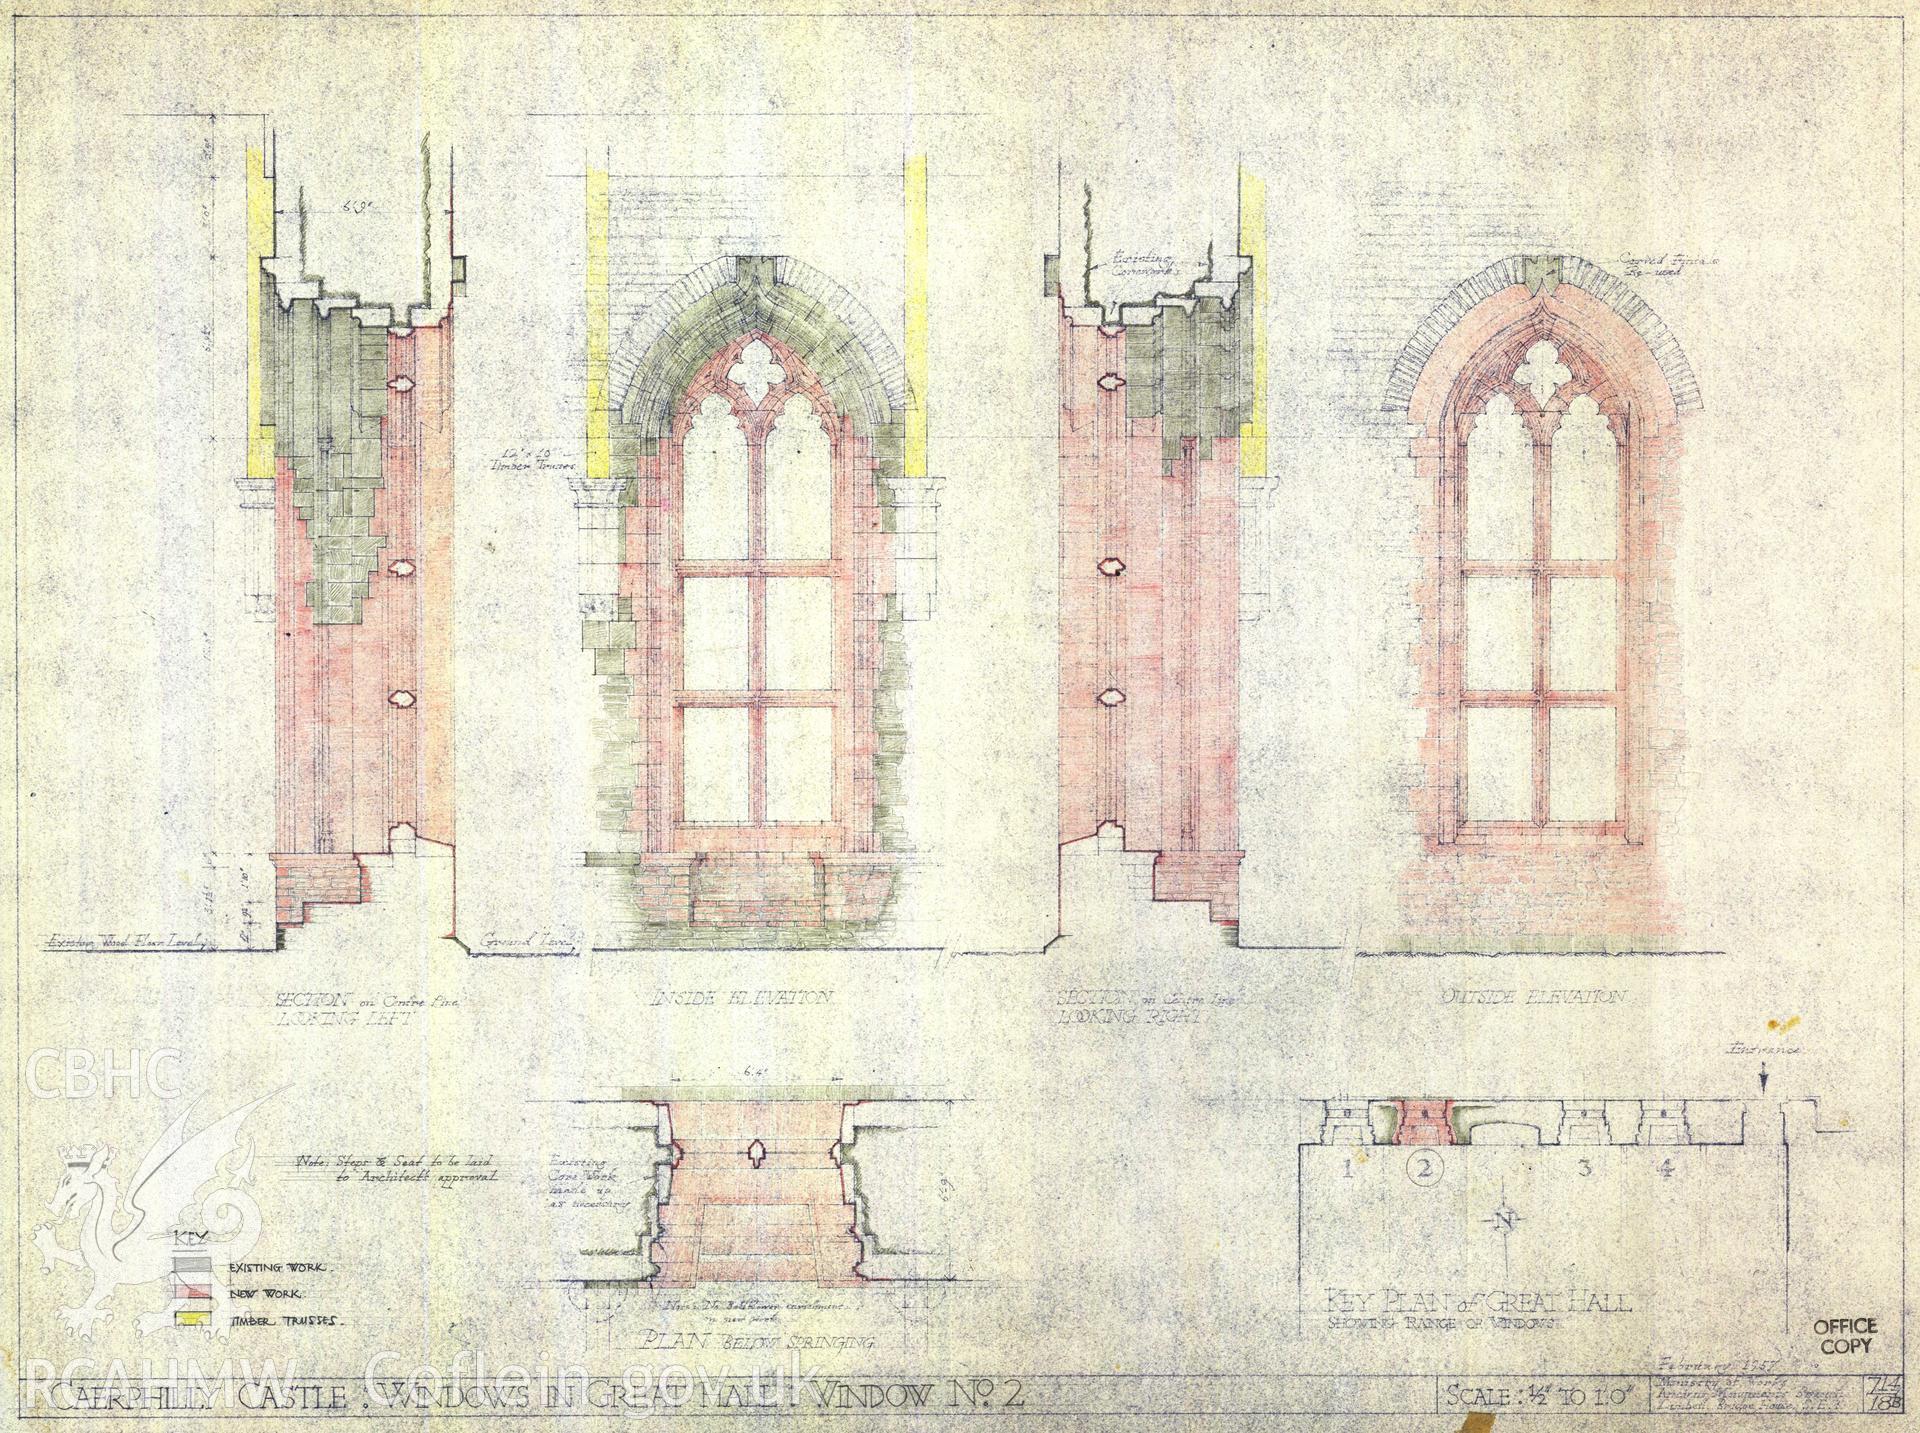 Cadw guardianship monument drawing of Caerphilly Castle. Hall, window 2, in+out for costing. Cadw ref. no: 714/18B. Scale 1:24.